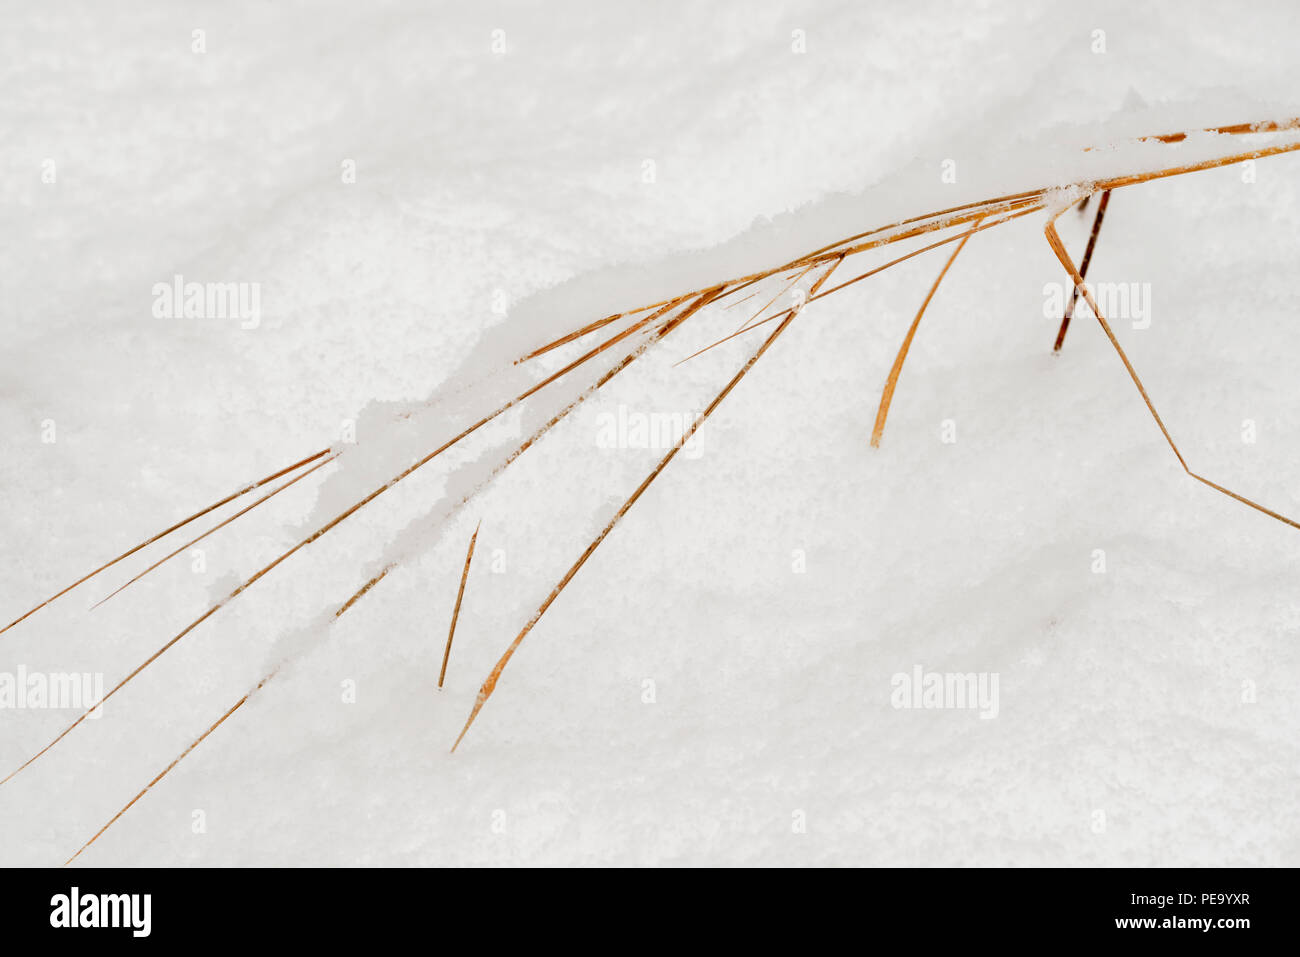 Snow-covered grasses after a late autumn snowstorm, Greater Sudbury, Ontario, Canada Stock Photo